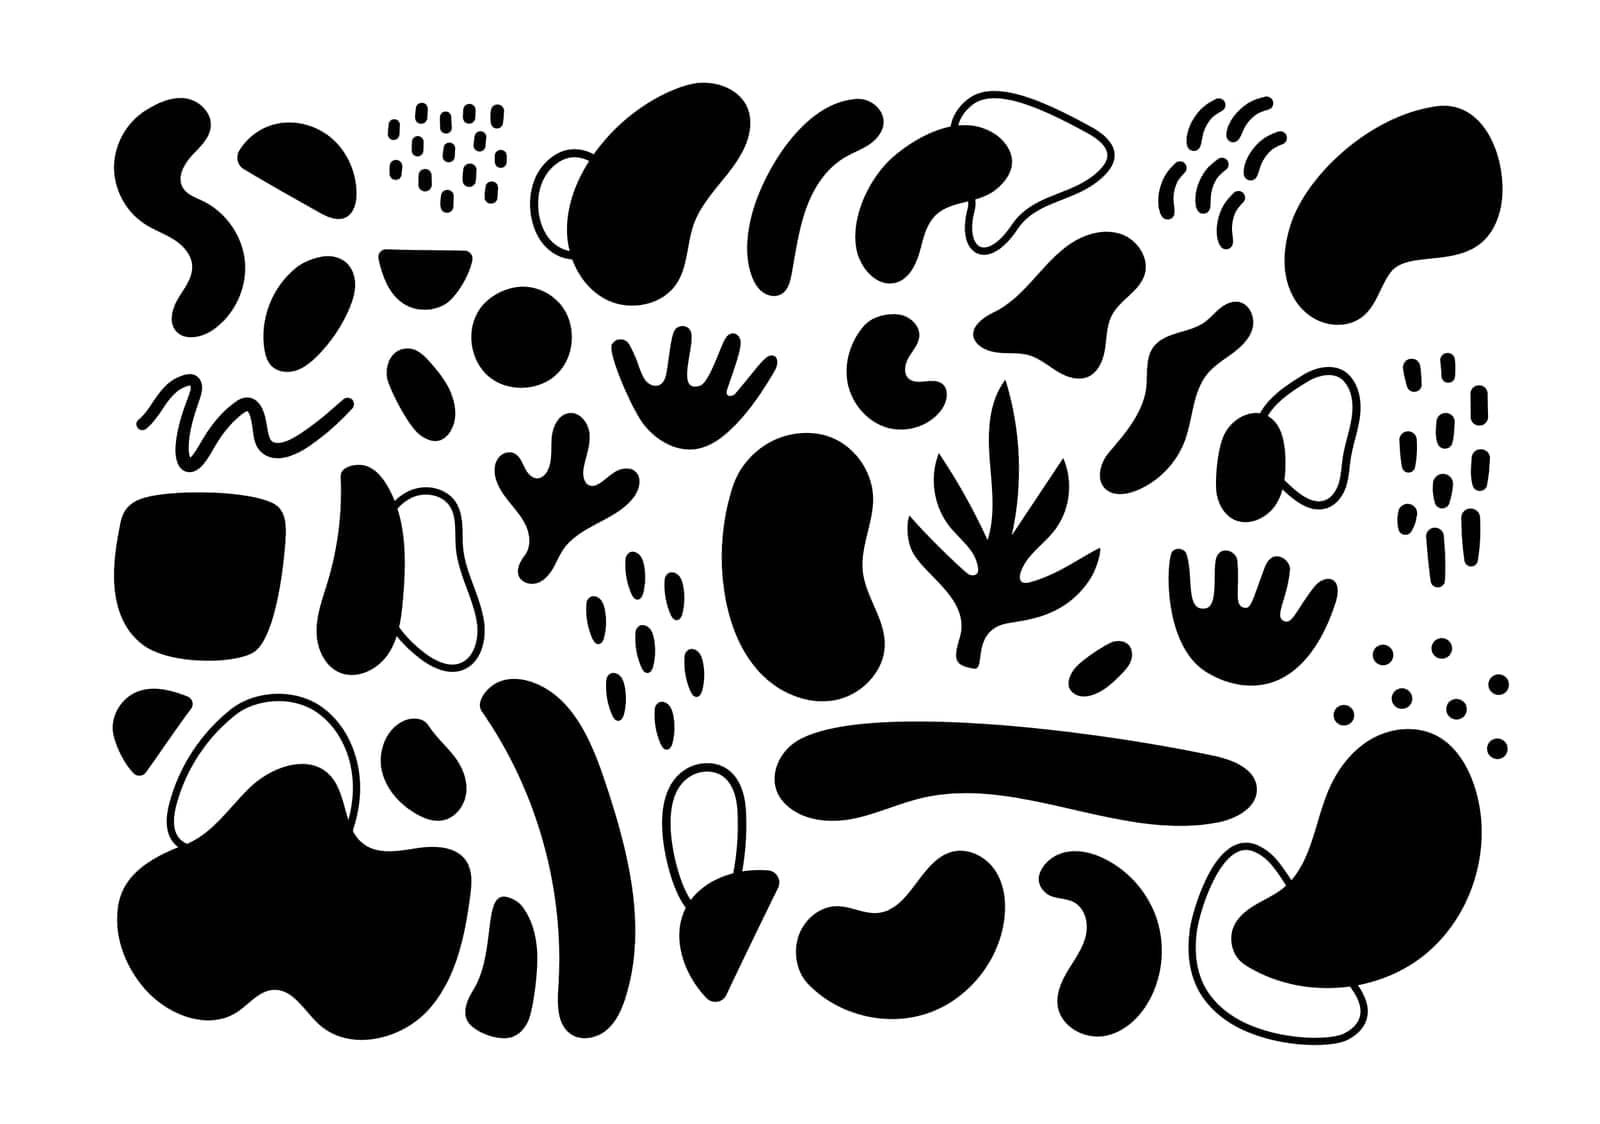 Abstract geometric shapes. Vector Hand drawn various shapes and doodle objects. Abstract contemporary modern style elements. Trendy black and white illustration. Stamp texture.